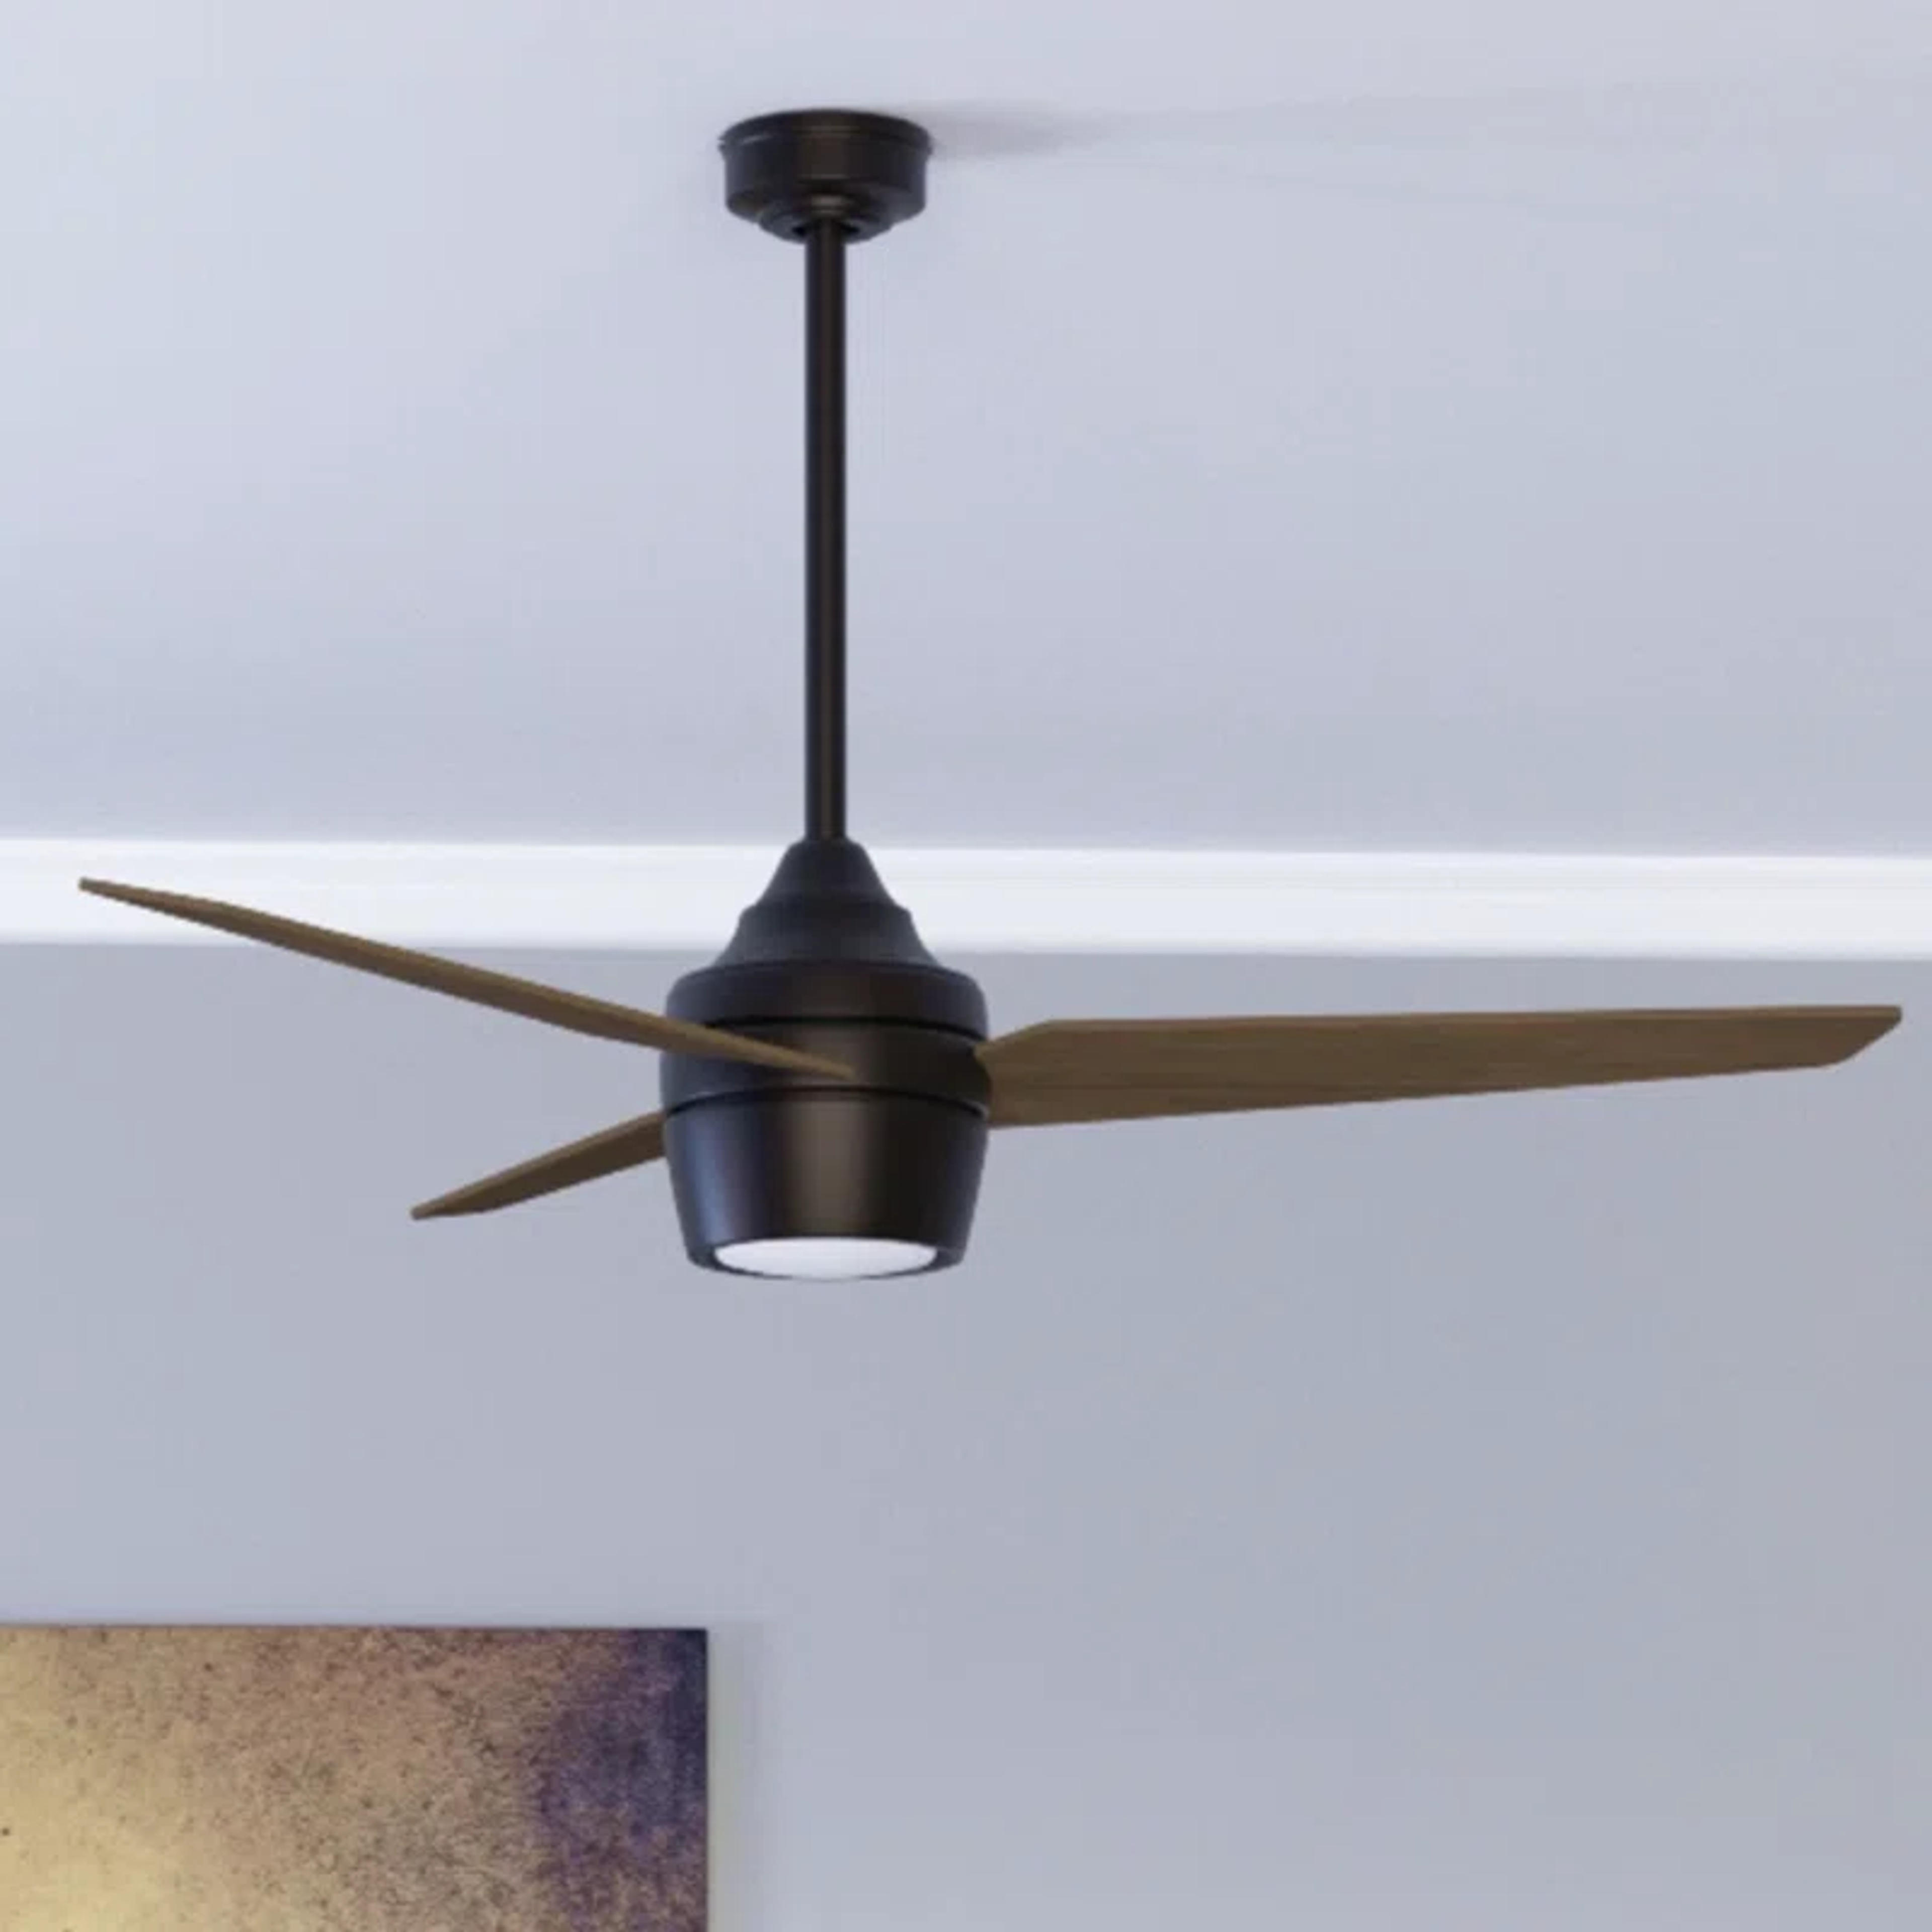 52'' Ares LED Propeller Ceiling Fan with Remote Control and Light Kit Included